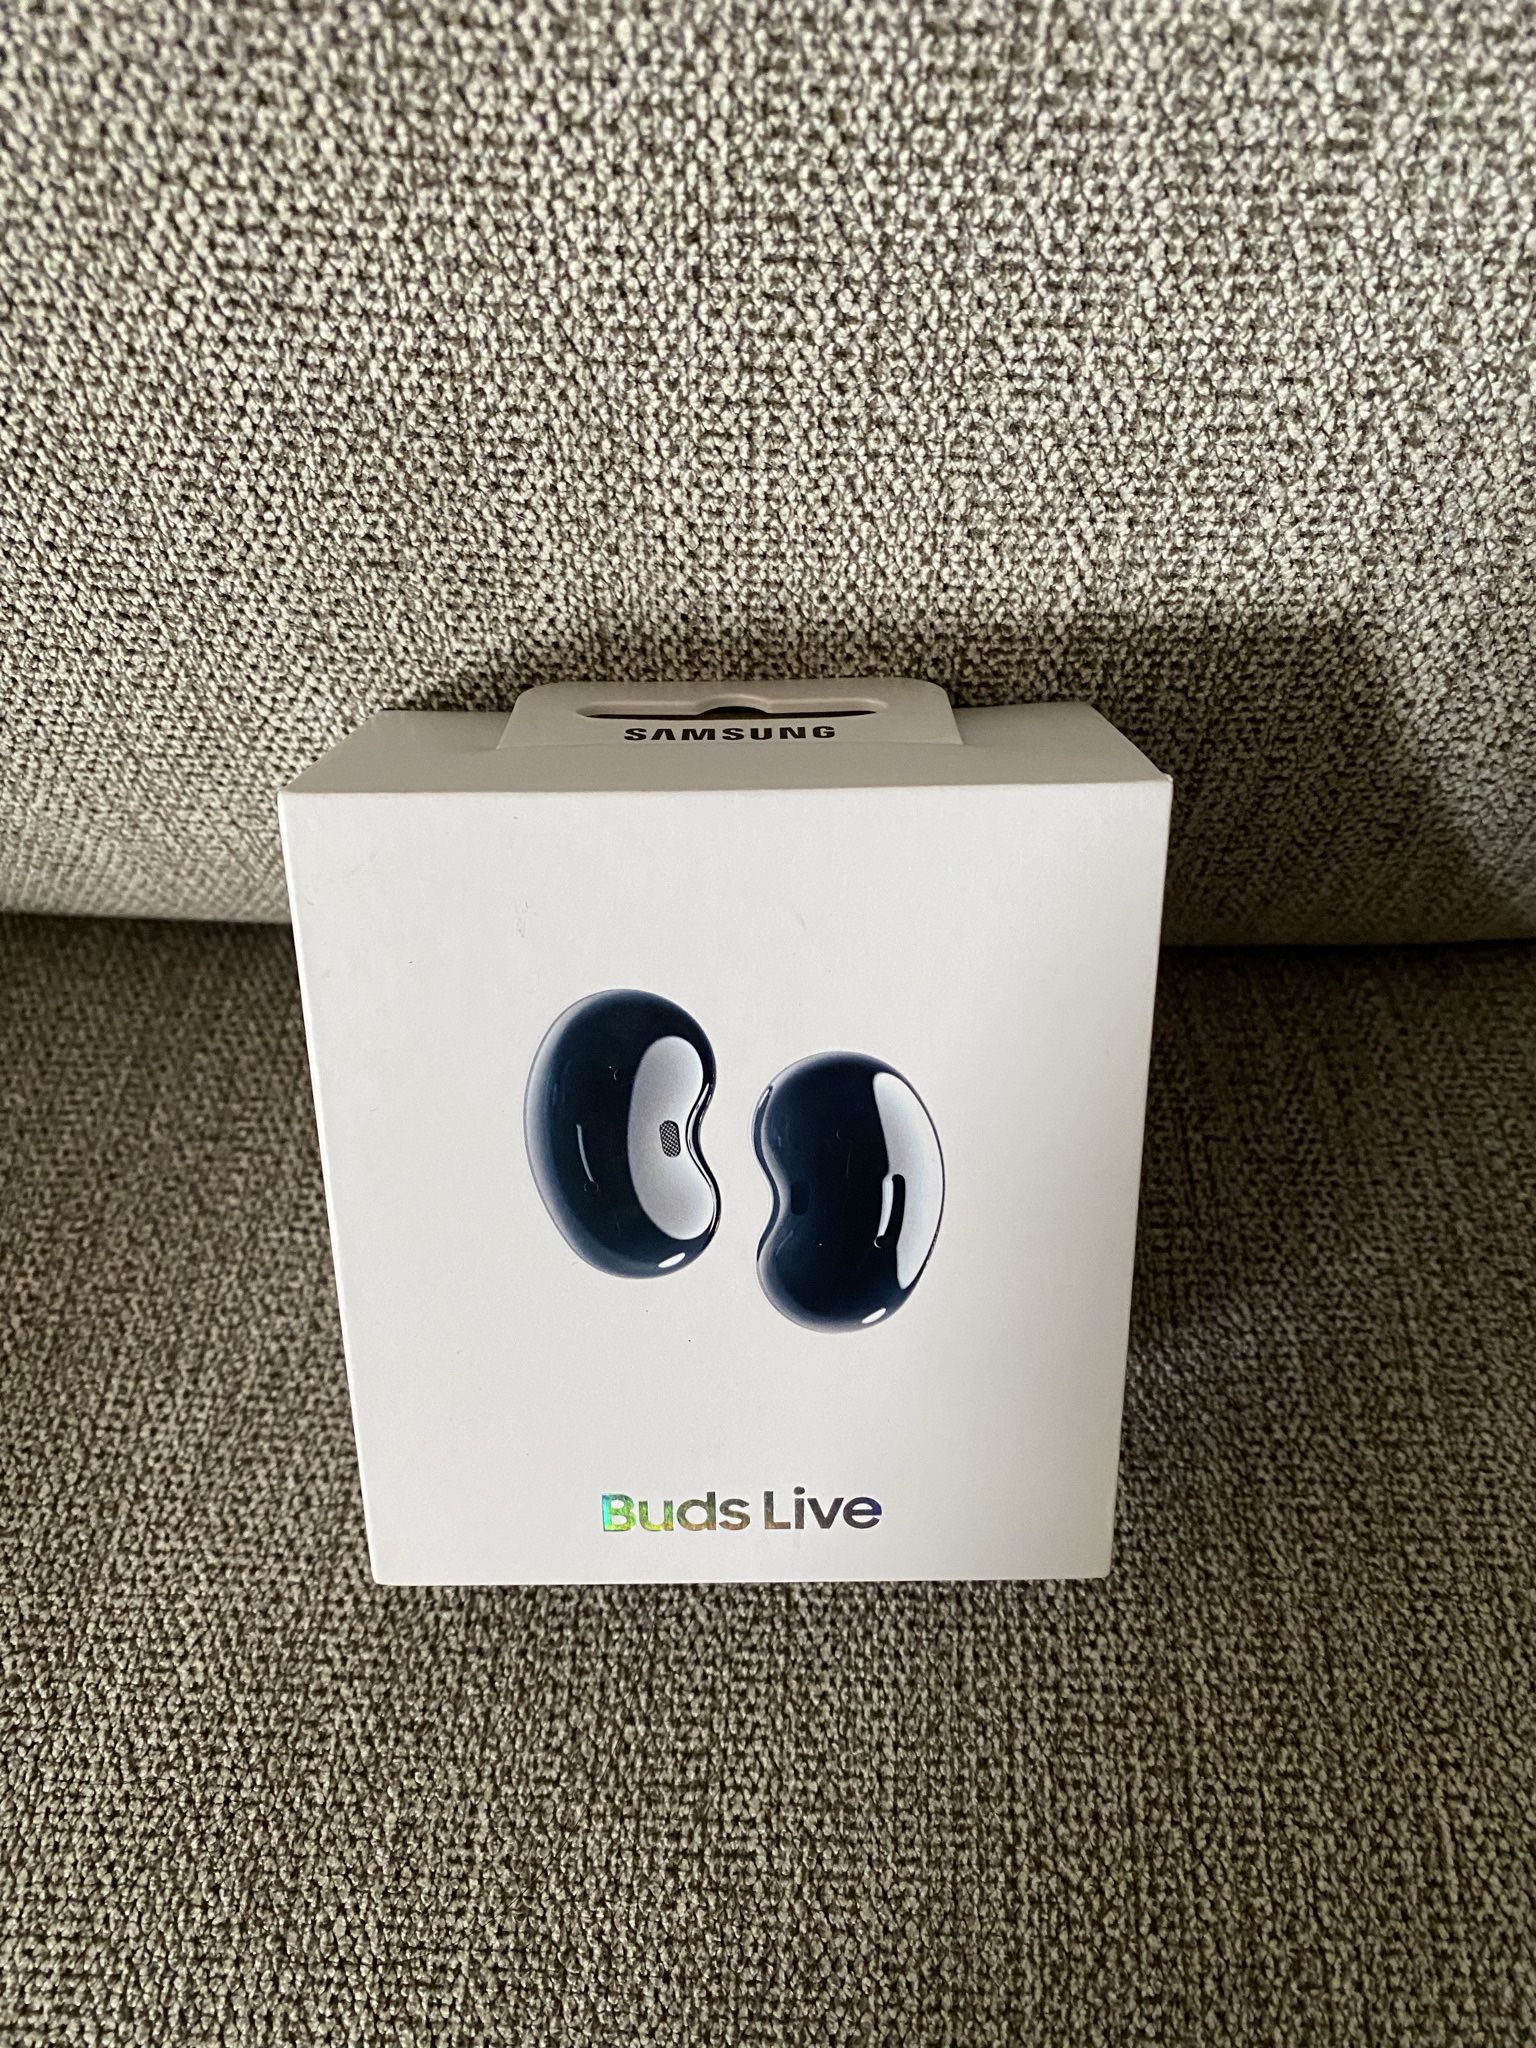 NEW IN BOX Samsung Galaxy Buds Live Earbuds Truly Wireless Noise Cancellation